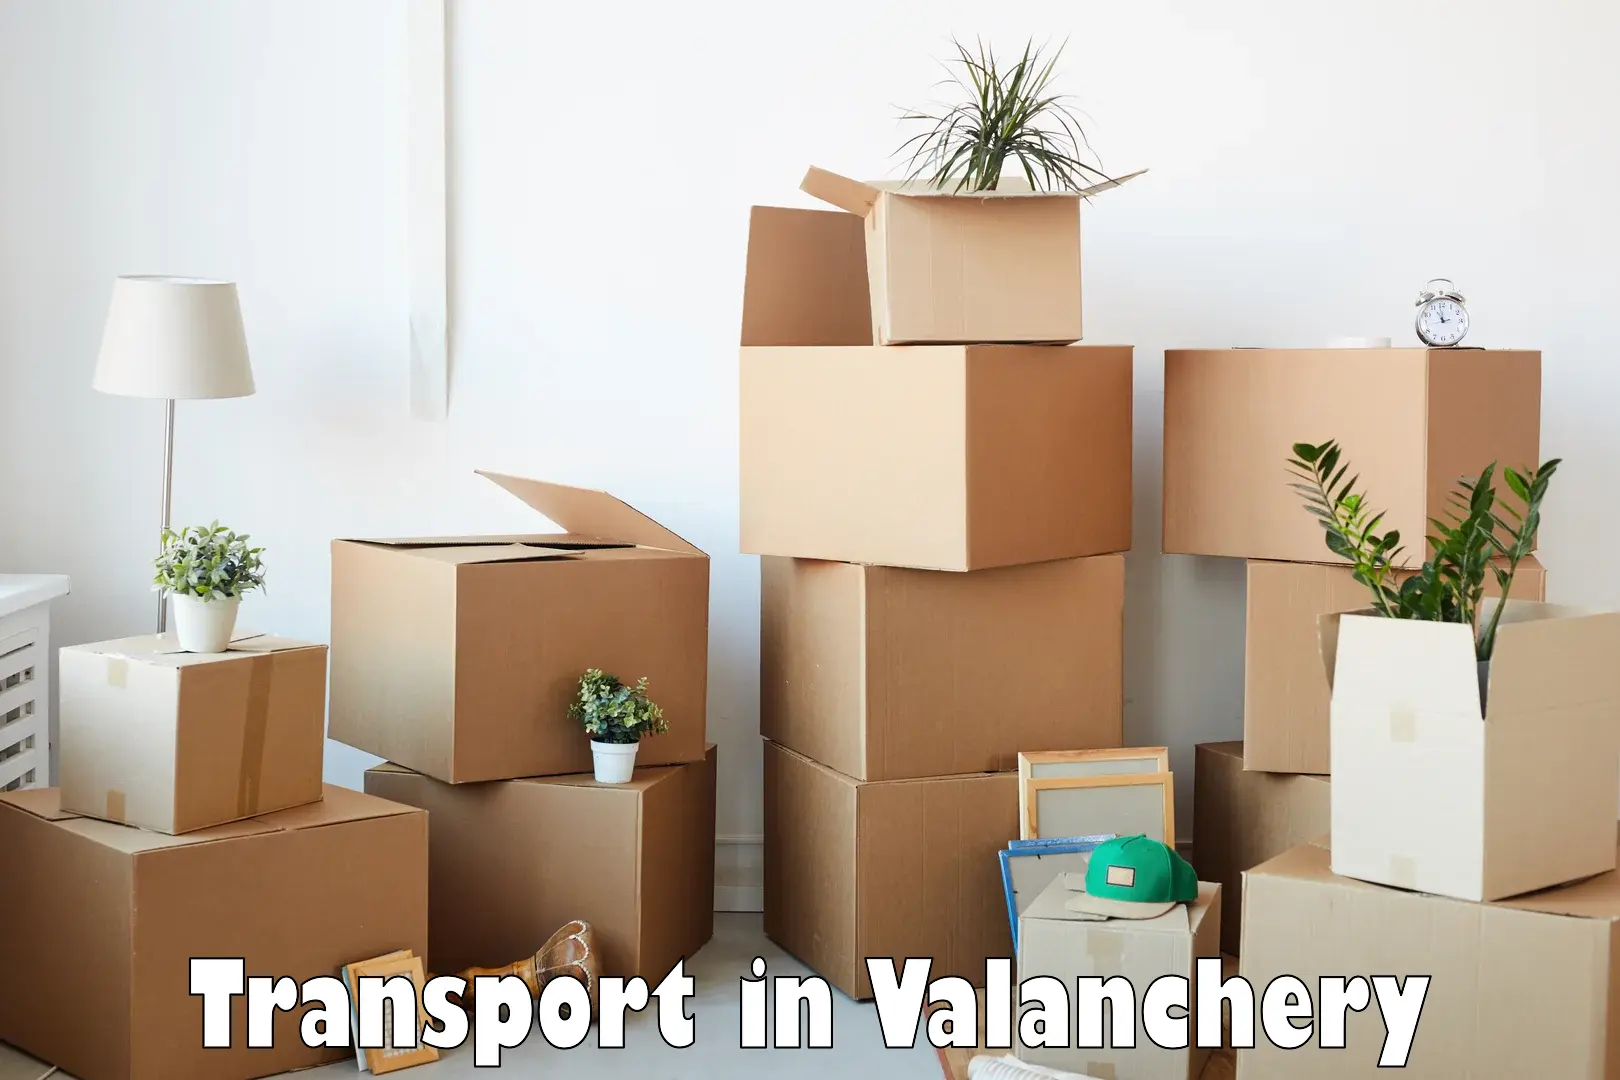 Nearby transport service in Valanchery